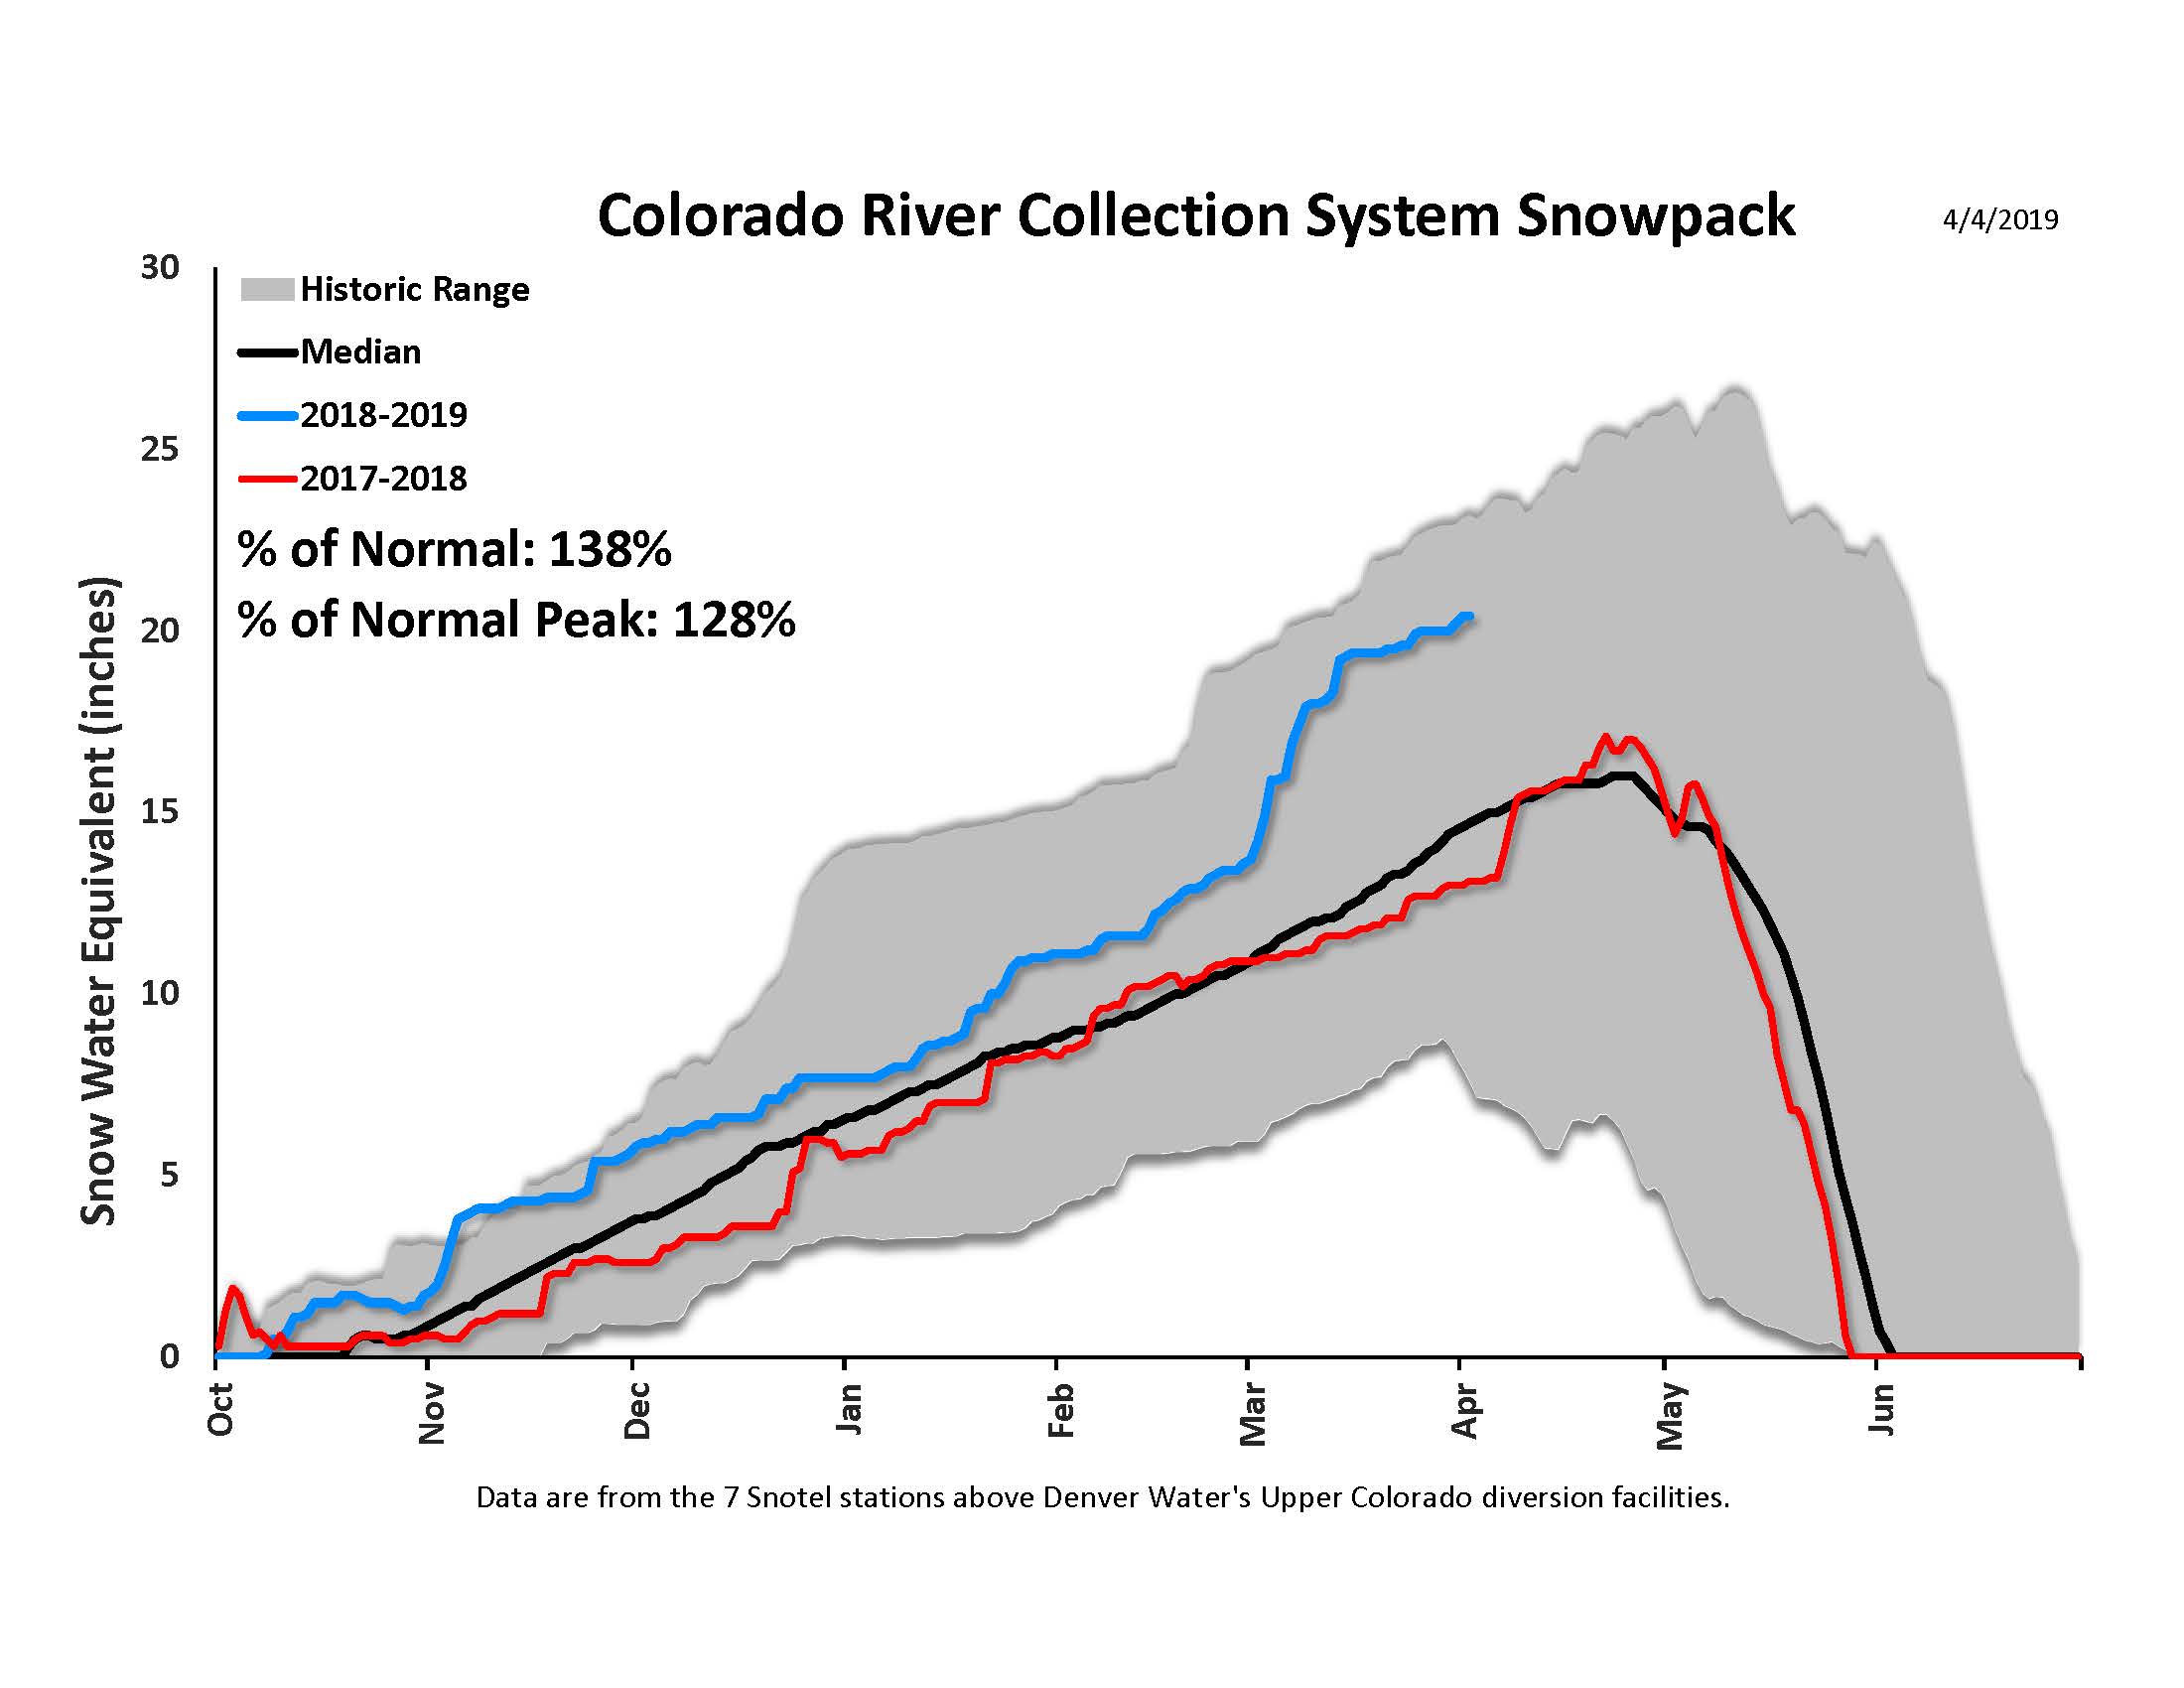 The snowpack in the headwaters of the Colorado River, above Denver Water’s diversion points, was at 152 percent of normal on March 18.